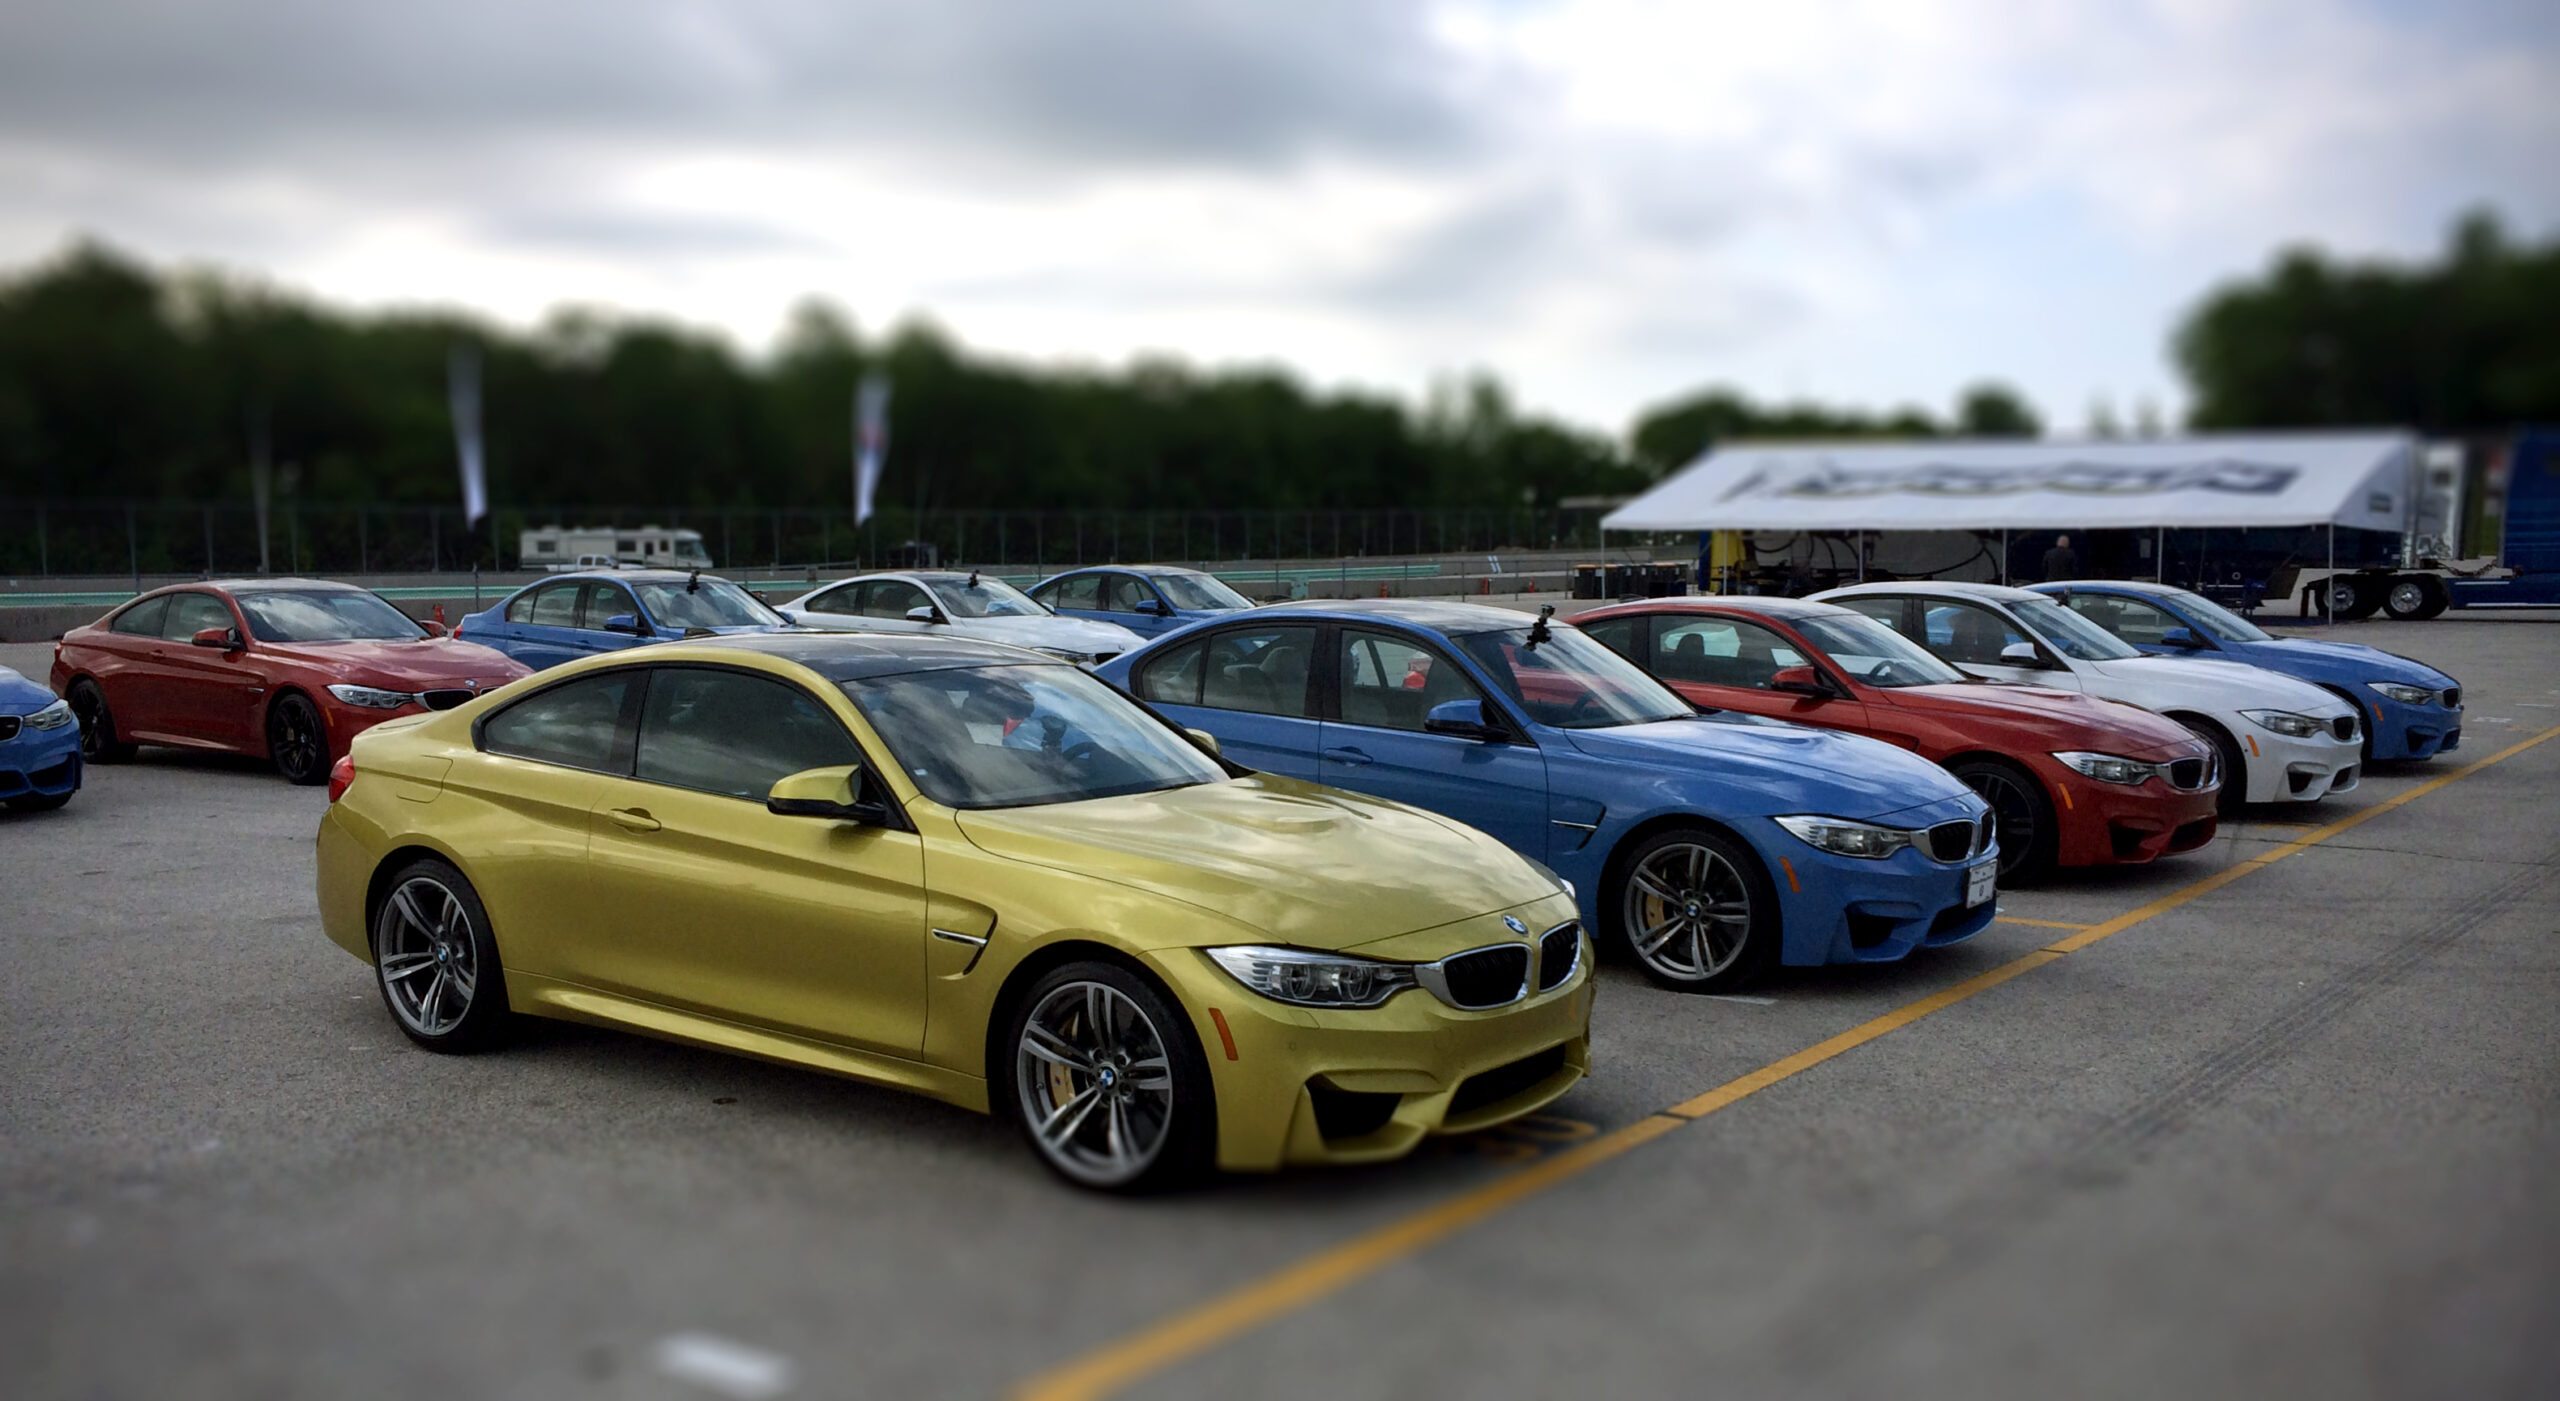 Driven: BMW M3 and M4. The heart and soul of BMW.